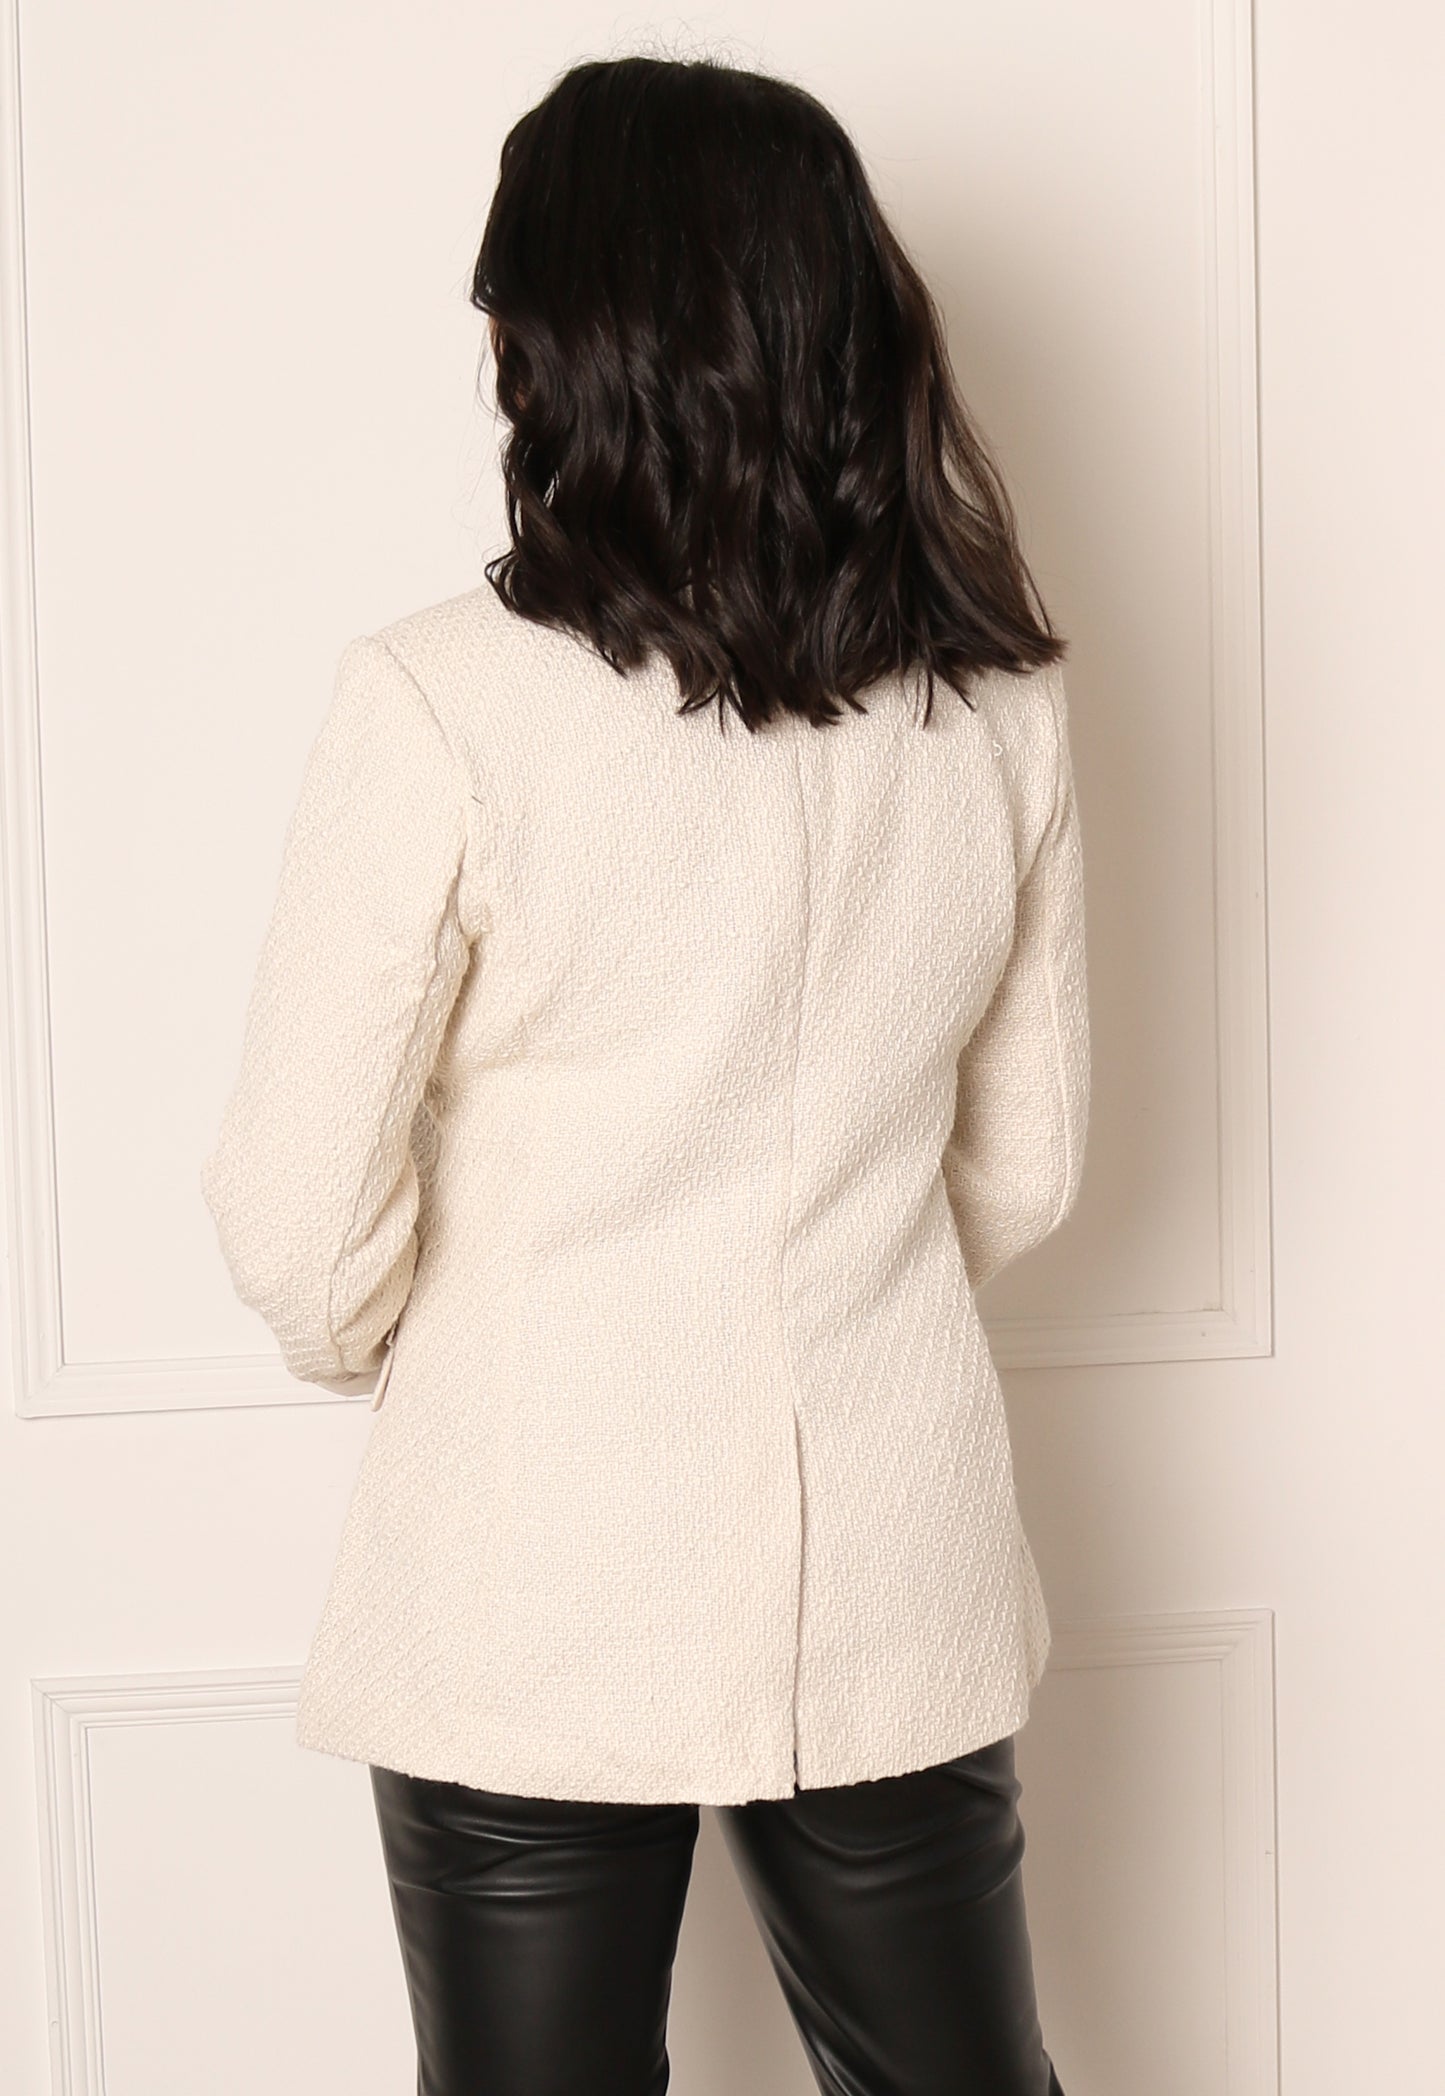 
                  
                    ONLY Piper Single Breasted Boucle Wool Style Blazer Jacket in Soft Cream - One Nation Clothing
                  
                